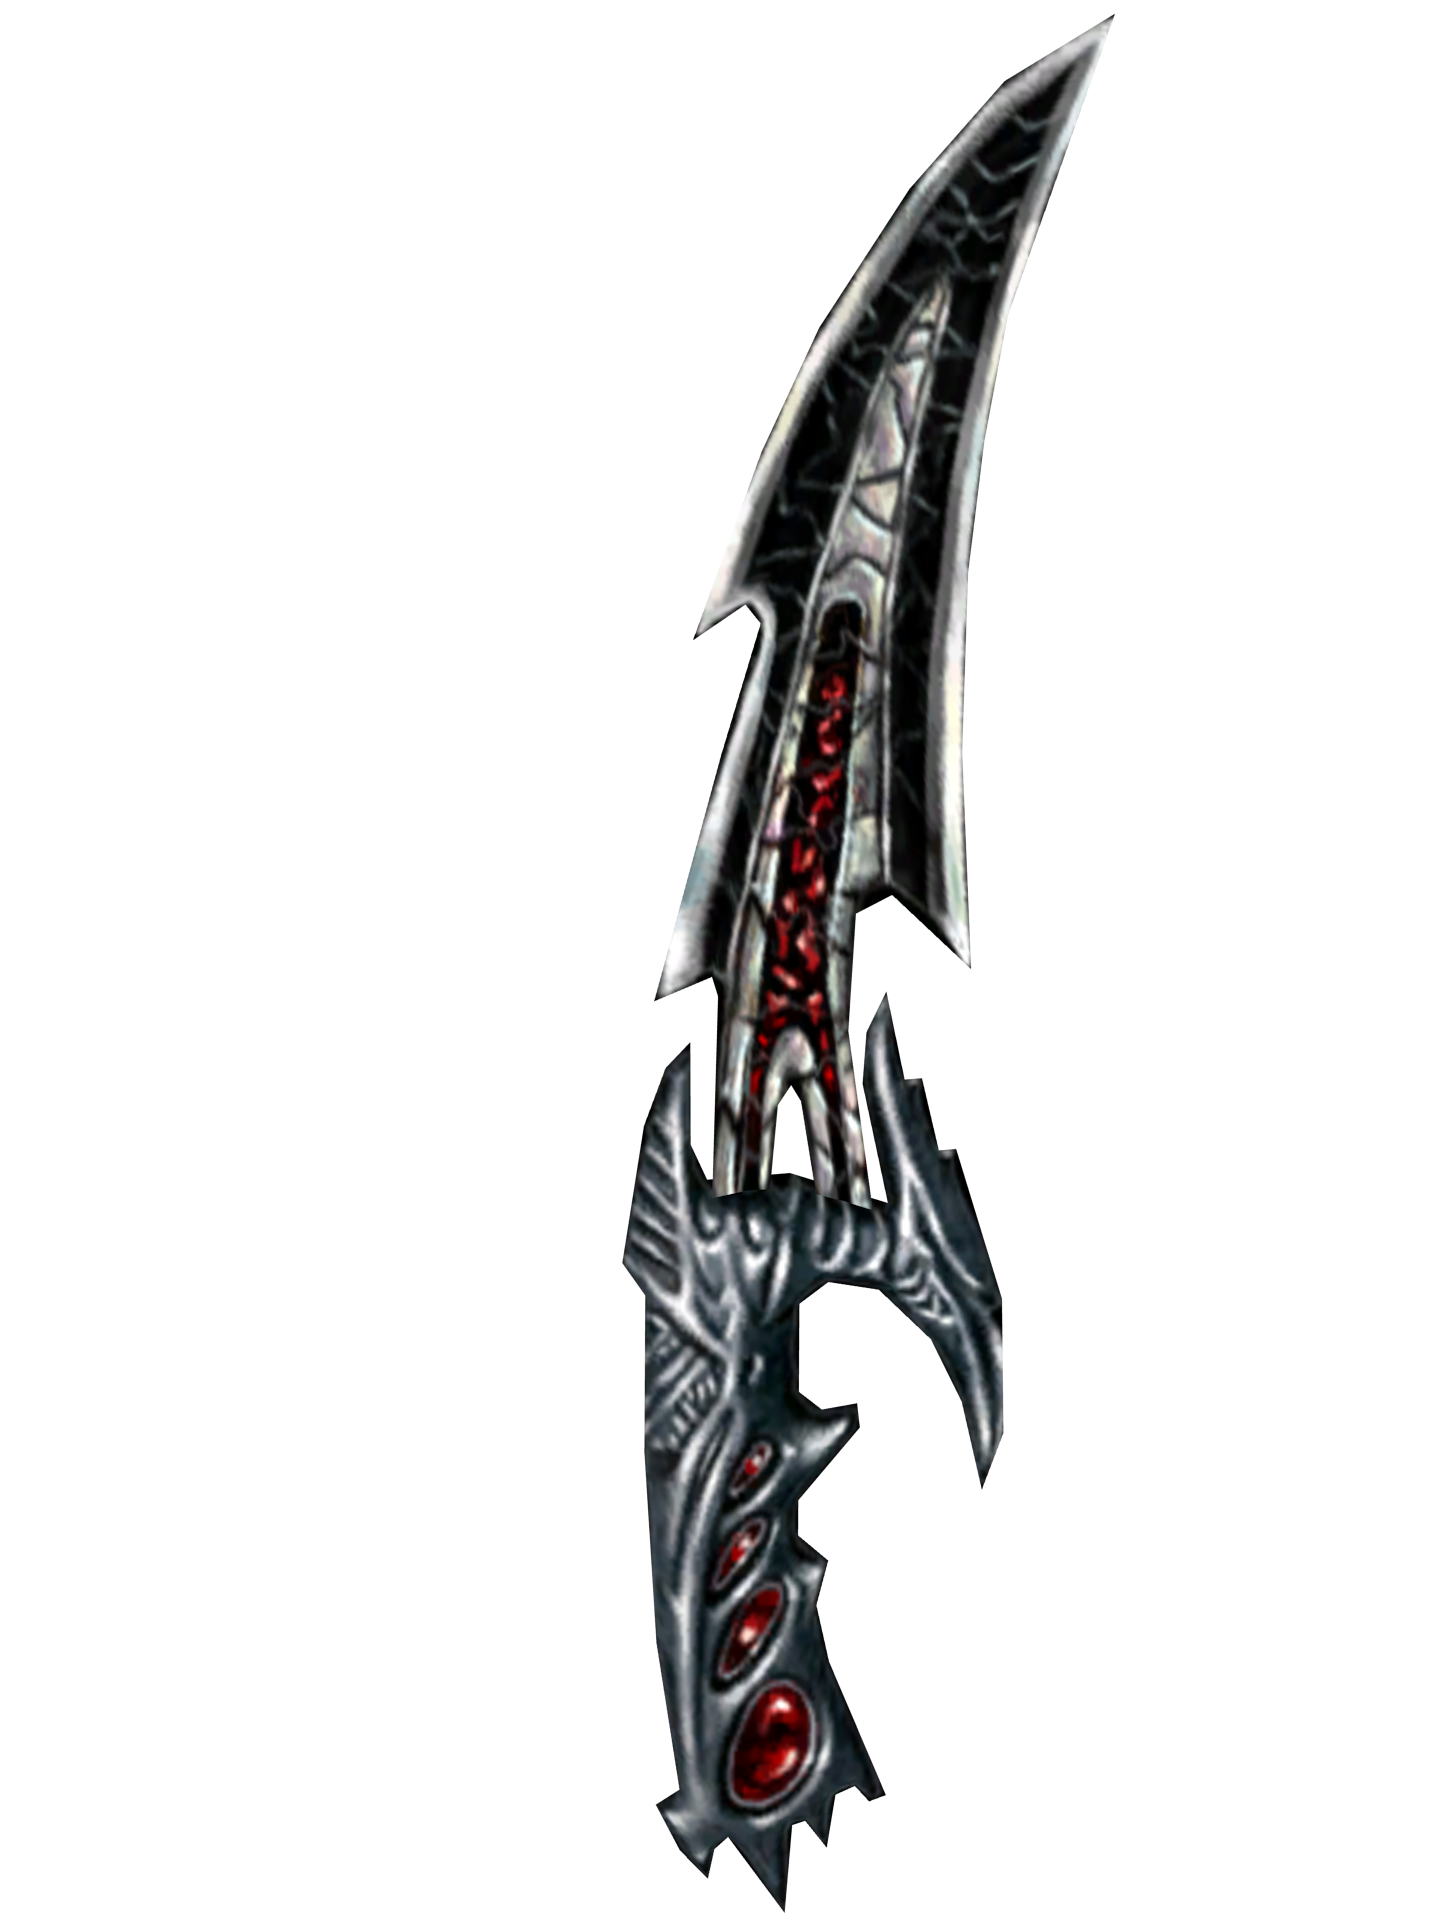 For The Elder Scrolls V: Skyrim on the PlayStation 3, a GameFAQs. Anyone  know where I can get a daedric dagger through force or just buy.